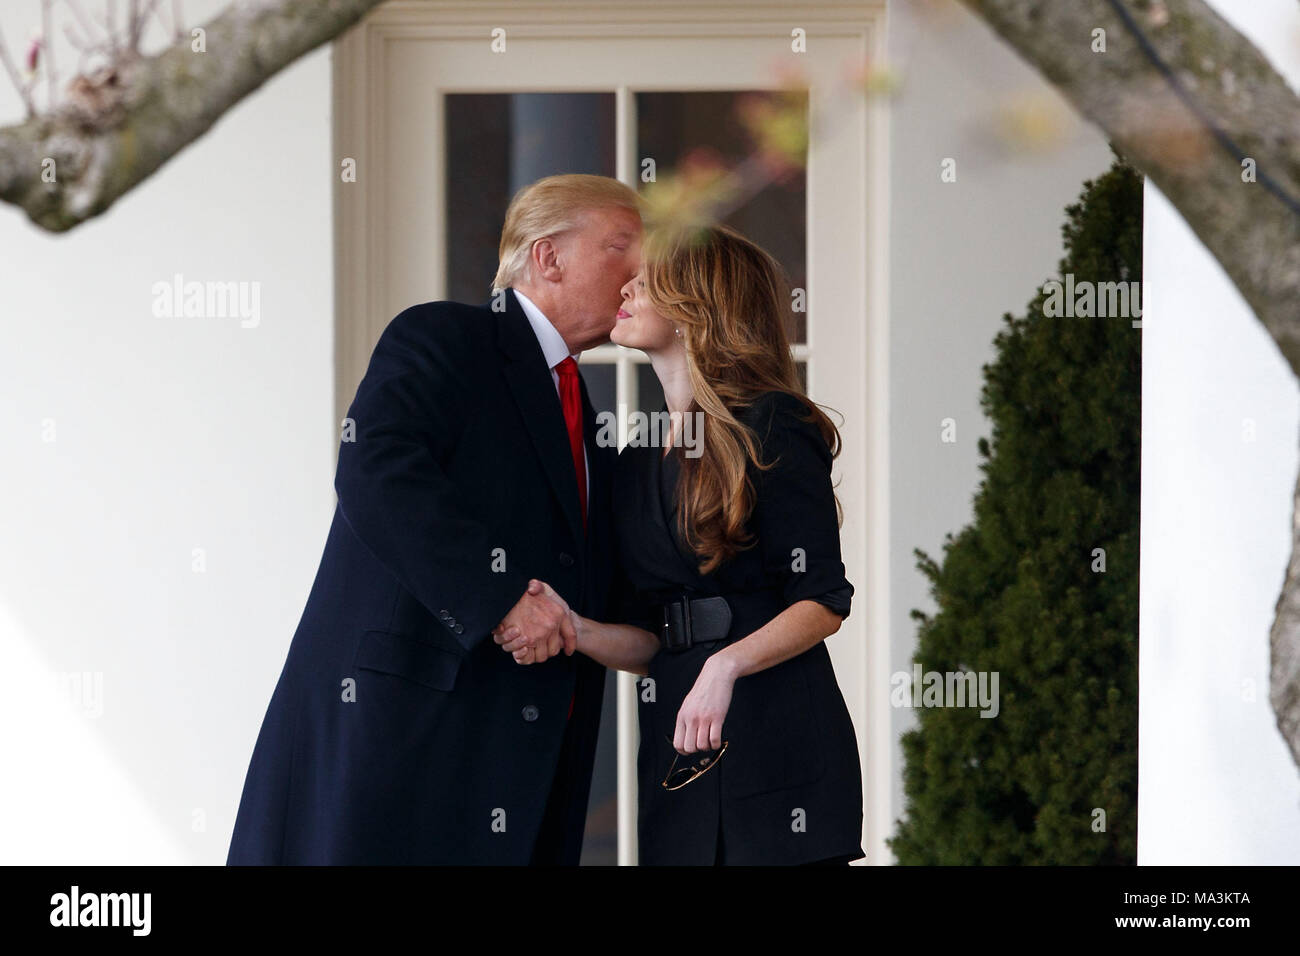 Washington, USA. 29th Mar, 2018. U.S. President Donald Trump (L) kisses outgoing White House Communications Director Hope Hicks on the West Wing Colonnade before departing from the White House in Washington, DC, the United States, on March 29, 2018. Credit: Ting Shen/Xinhua/Alamy Live News Stock Photo